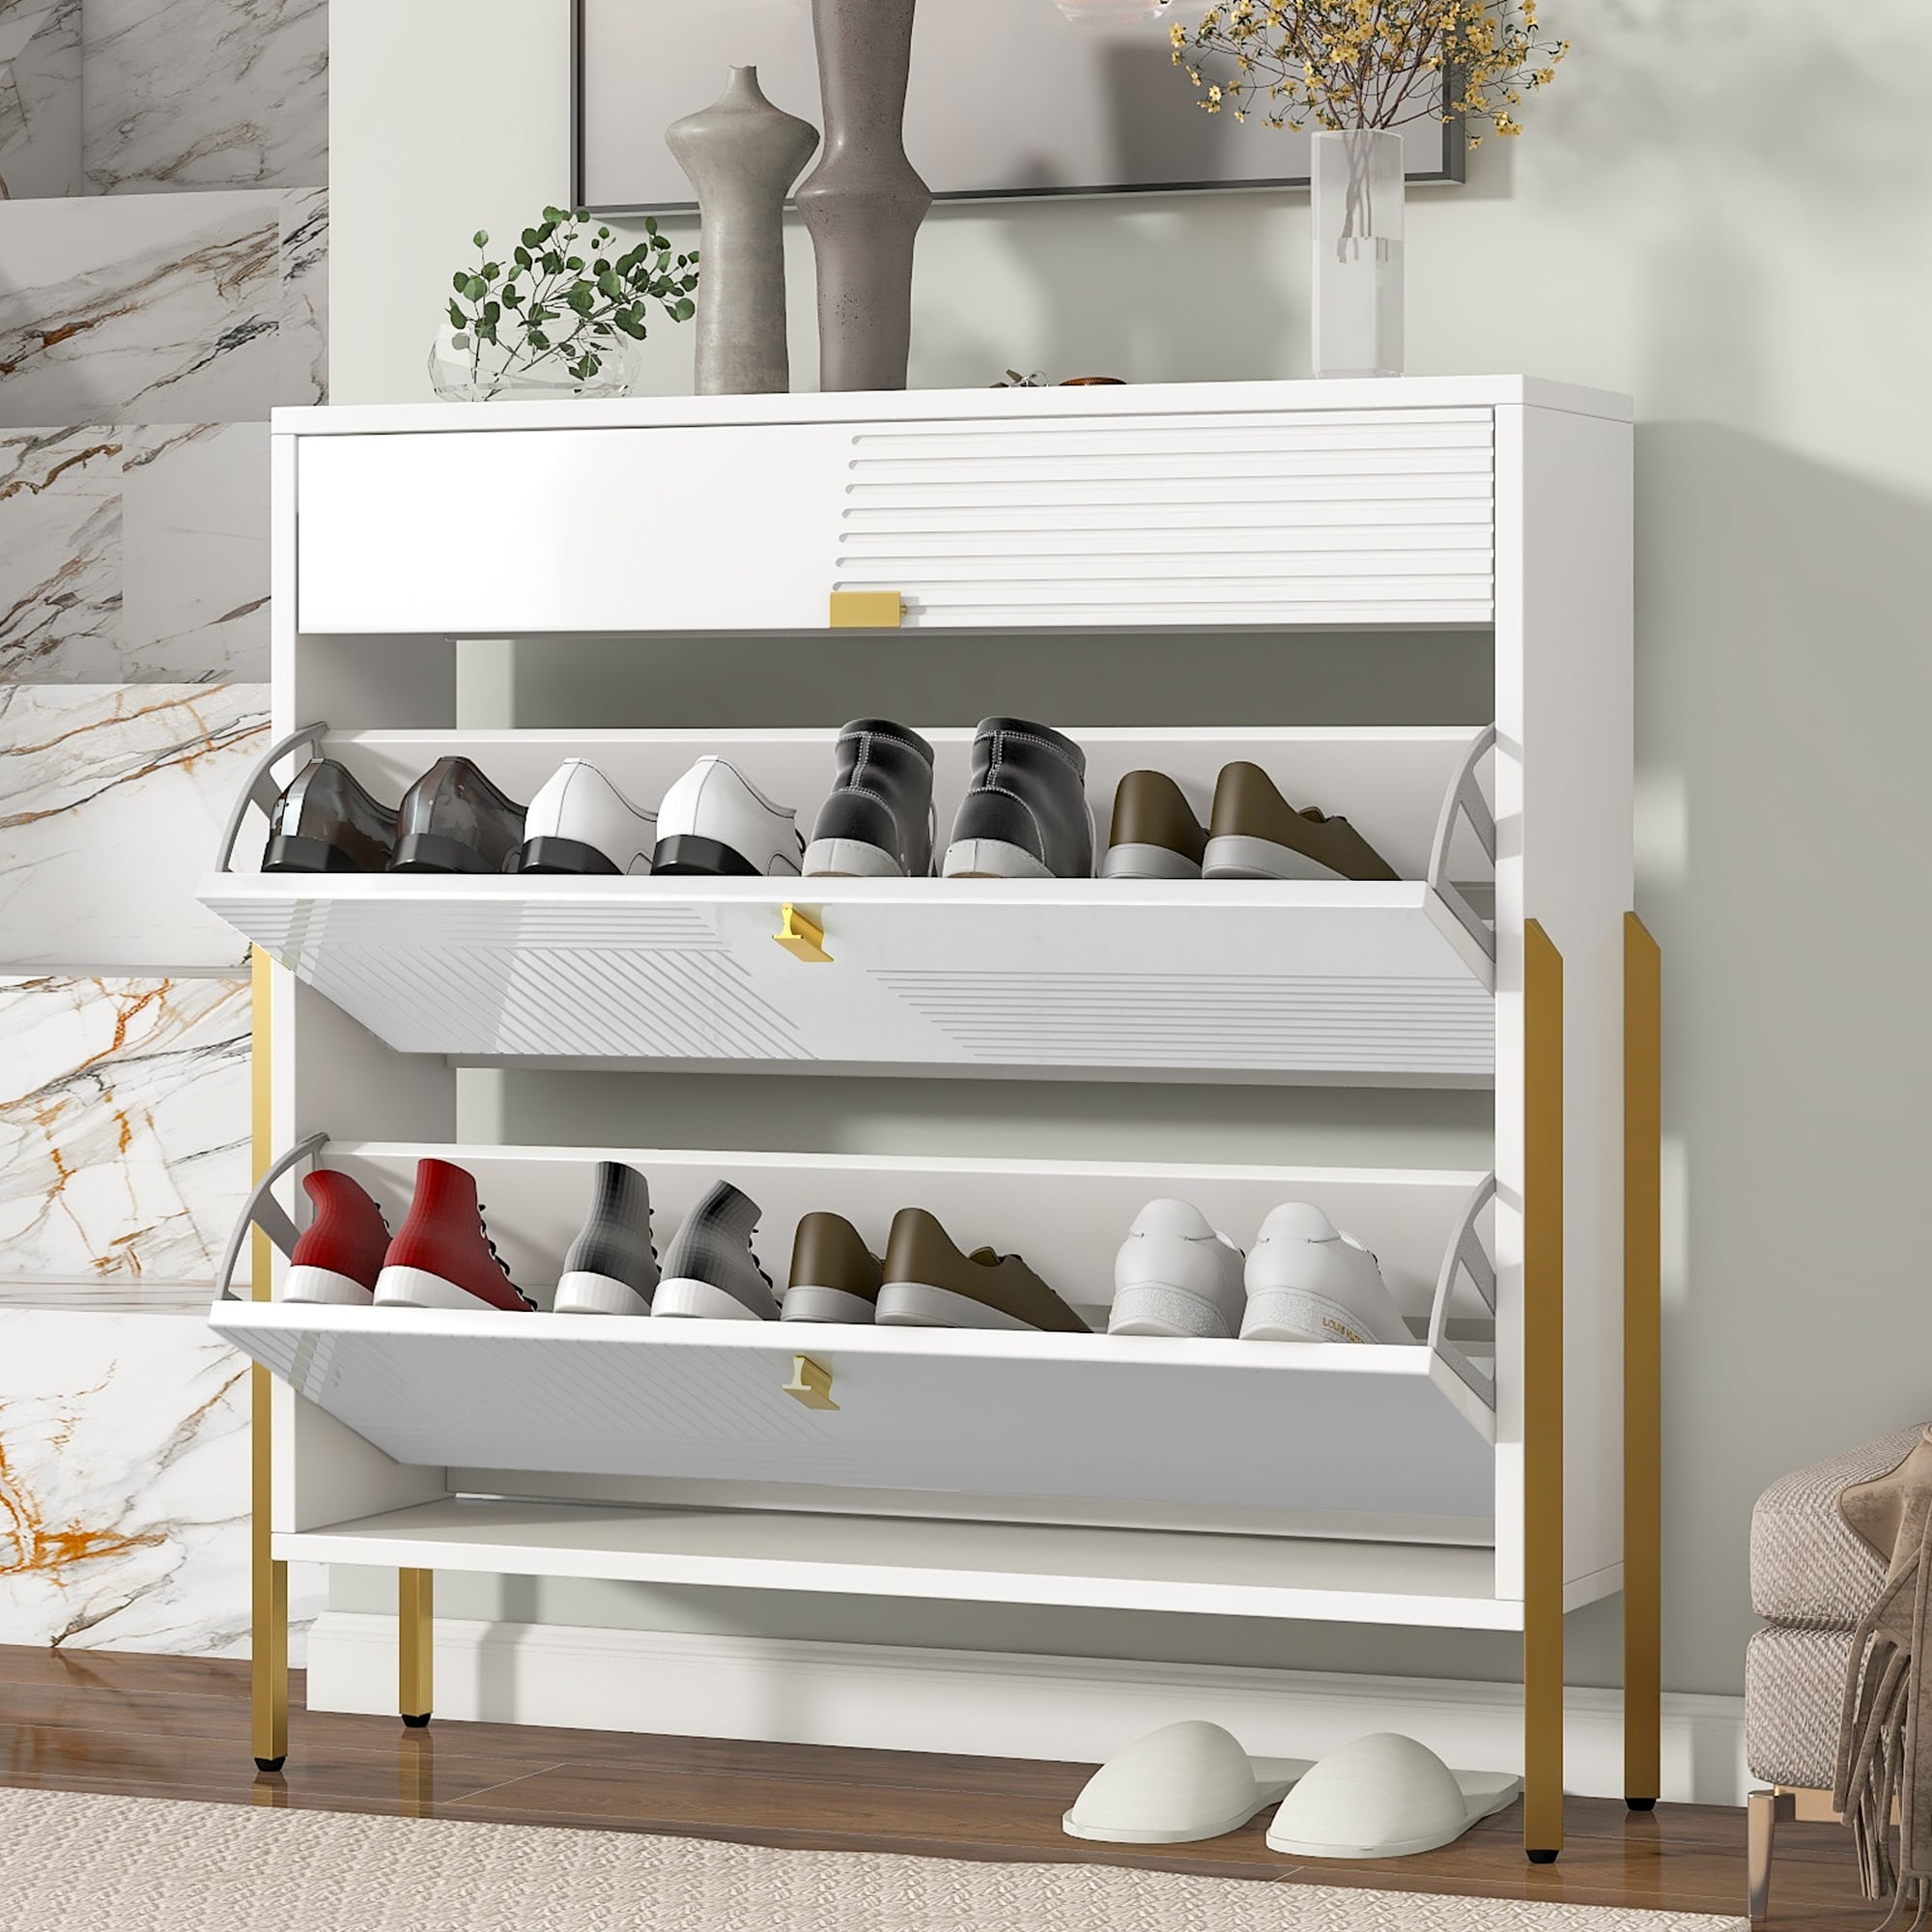 https://ak1.ostkcdn.com/images/products/is/images/direct/9480482d958f8f82c3a97407d0339f6135dcc89e/Modern-Shoe-Cabinet-with-2-Flip-Drawers-%26-1-Slide-Drawer%2C-Modern-Free-Standing-Shoe-Rack-Shoe-Storage-Cabinet.jpg